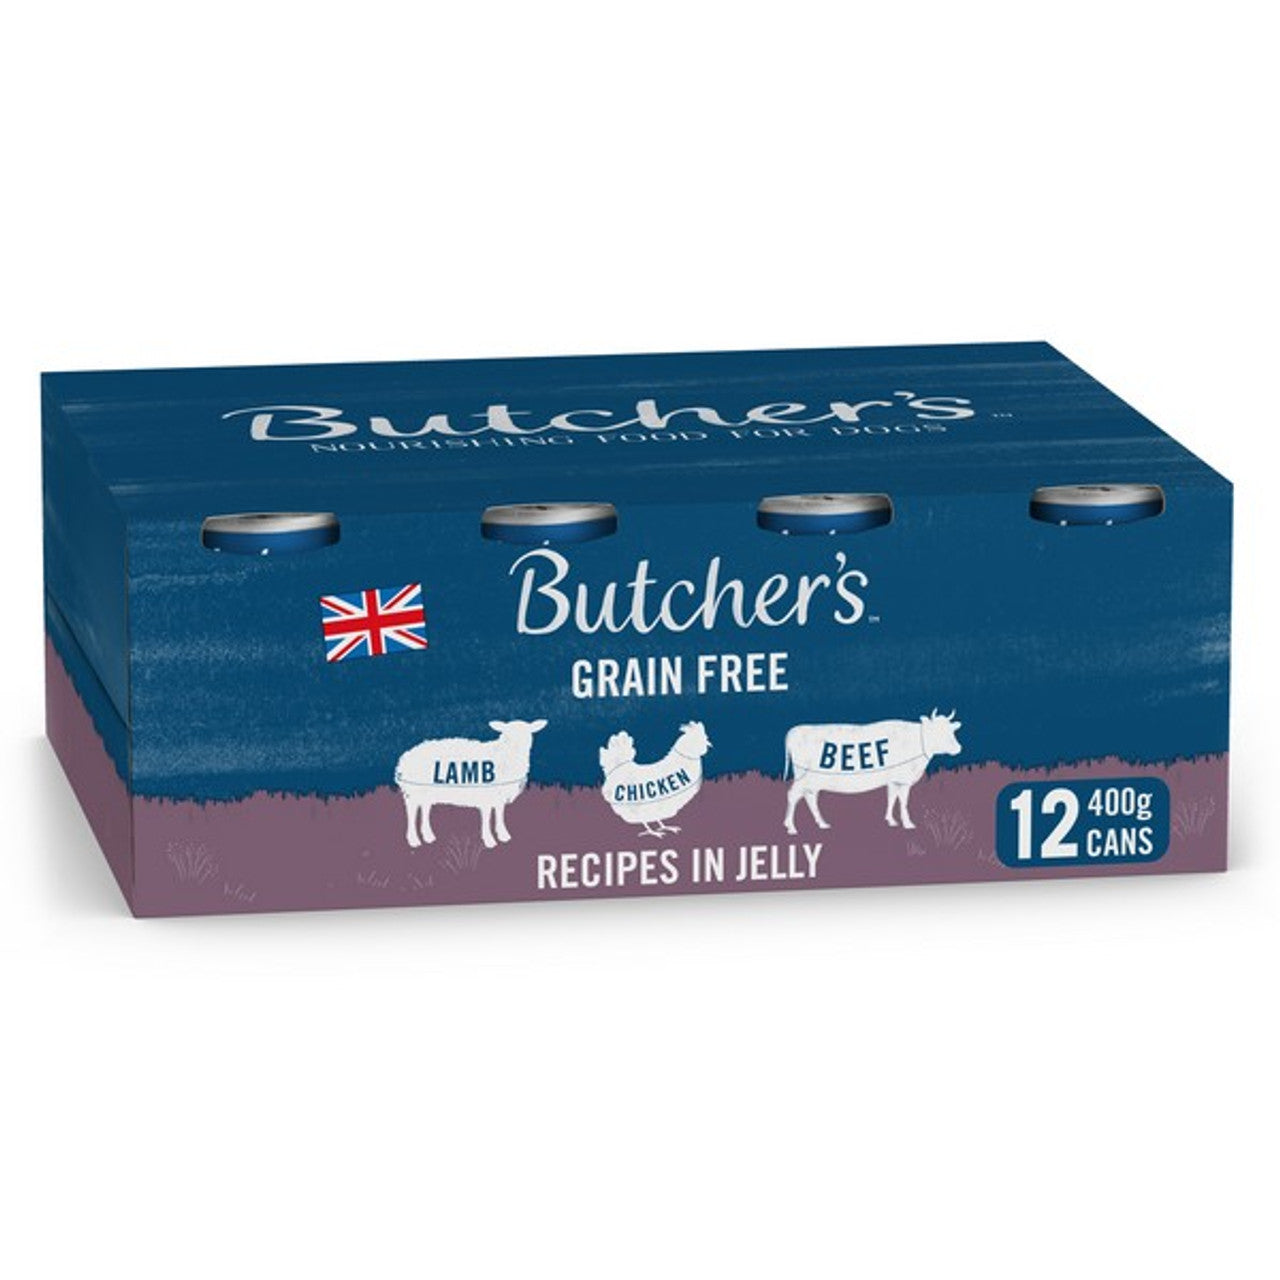 Butchers Grain Free Meaty Recipes In Jelly 400g - Pack of 12